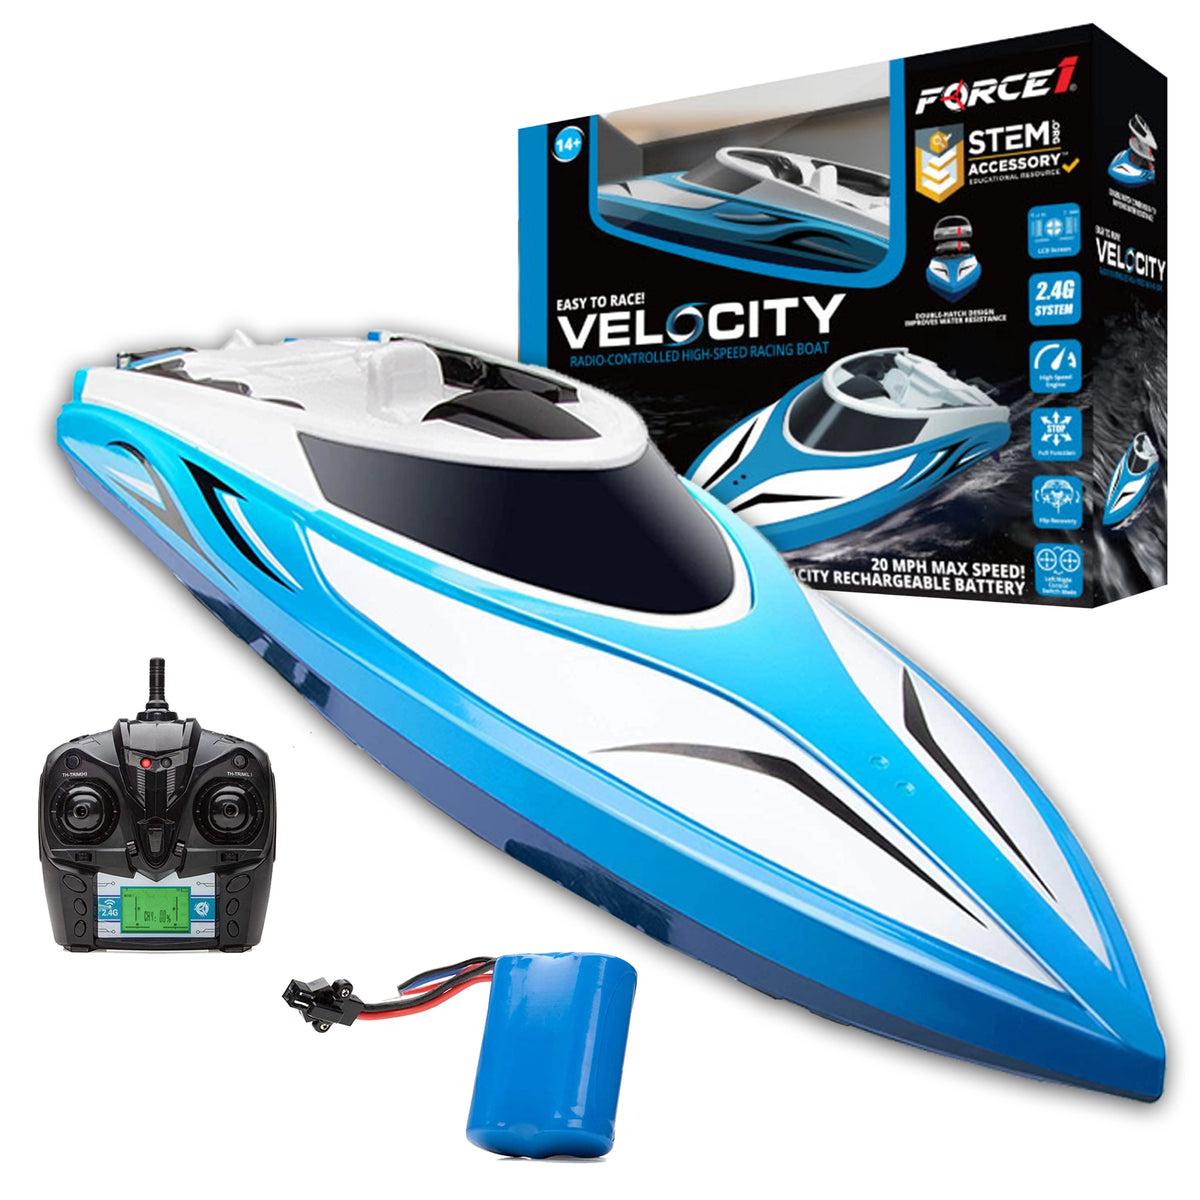 W 09 Rc Boat: Advanced Features, Easy Usage, and High Durability